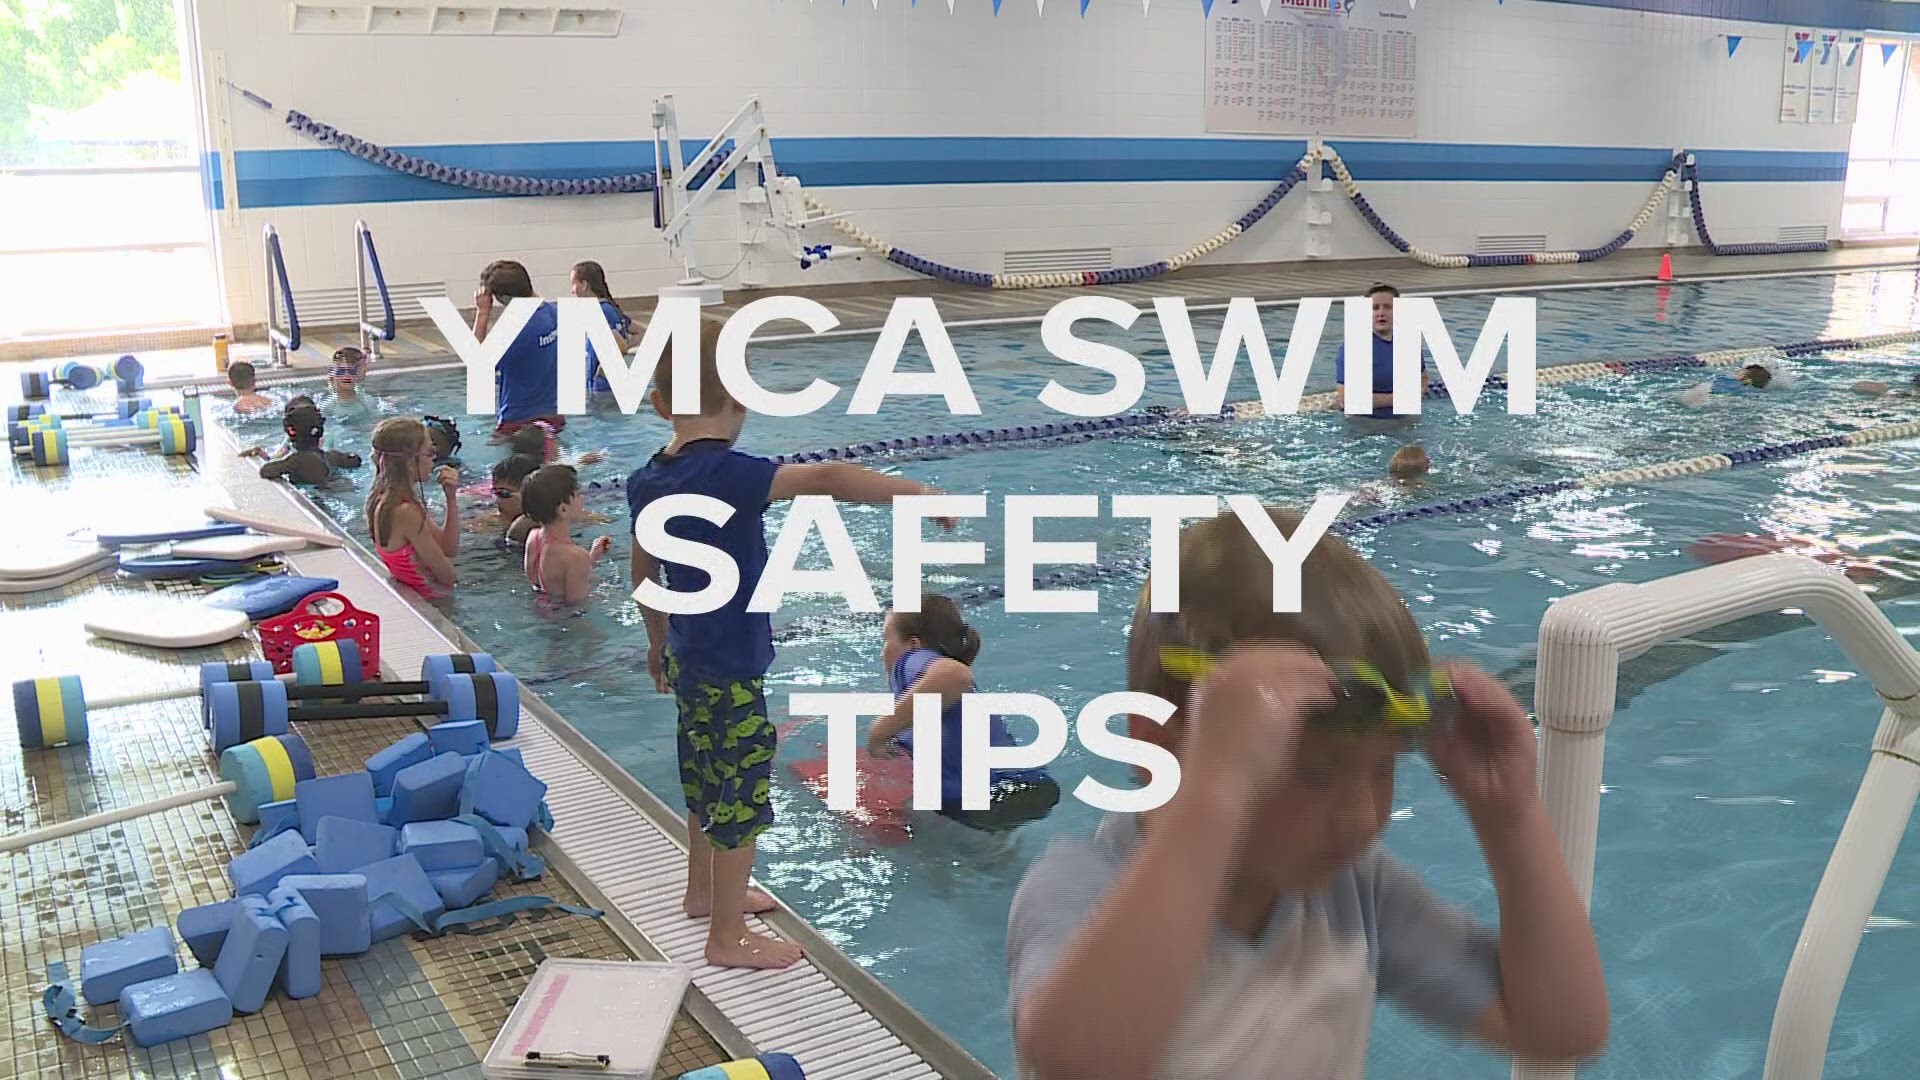 Here are some quick tips from the YMCA to have a safe and fun summer!